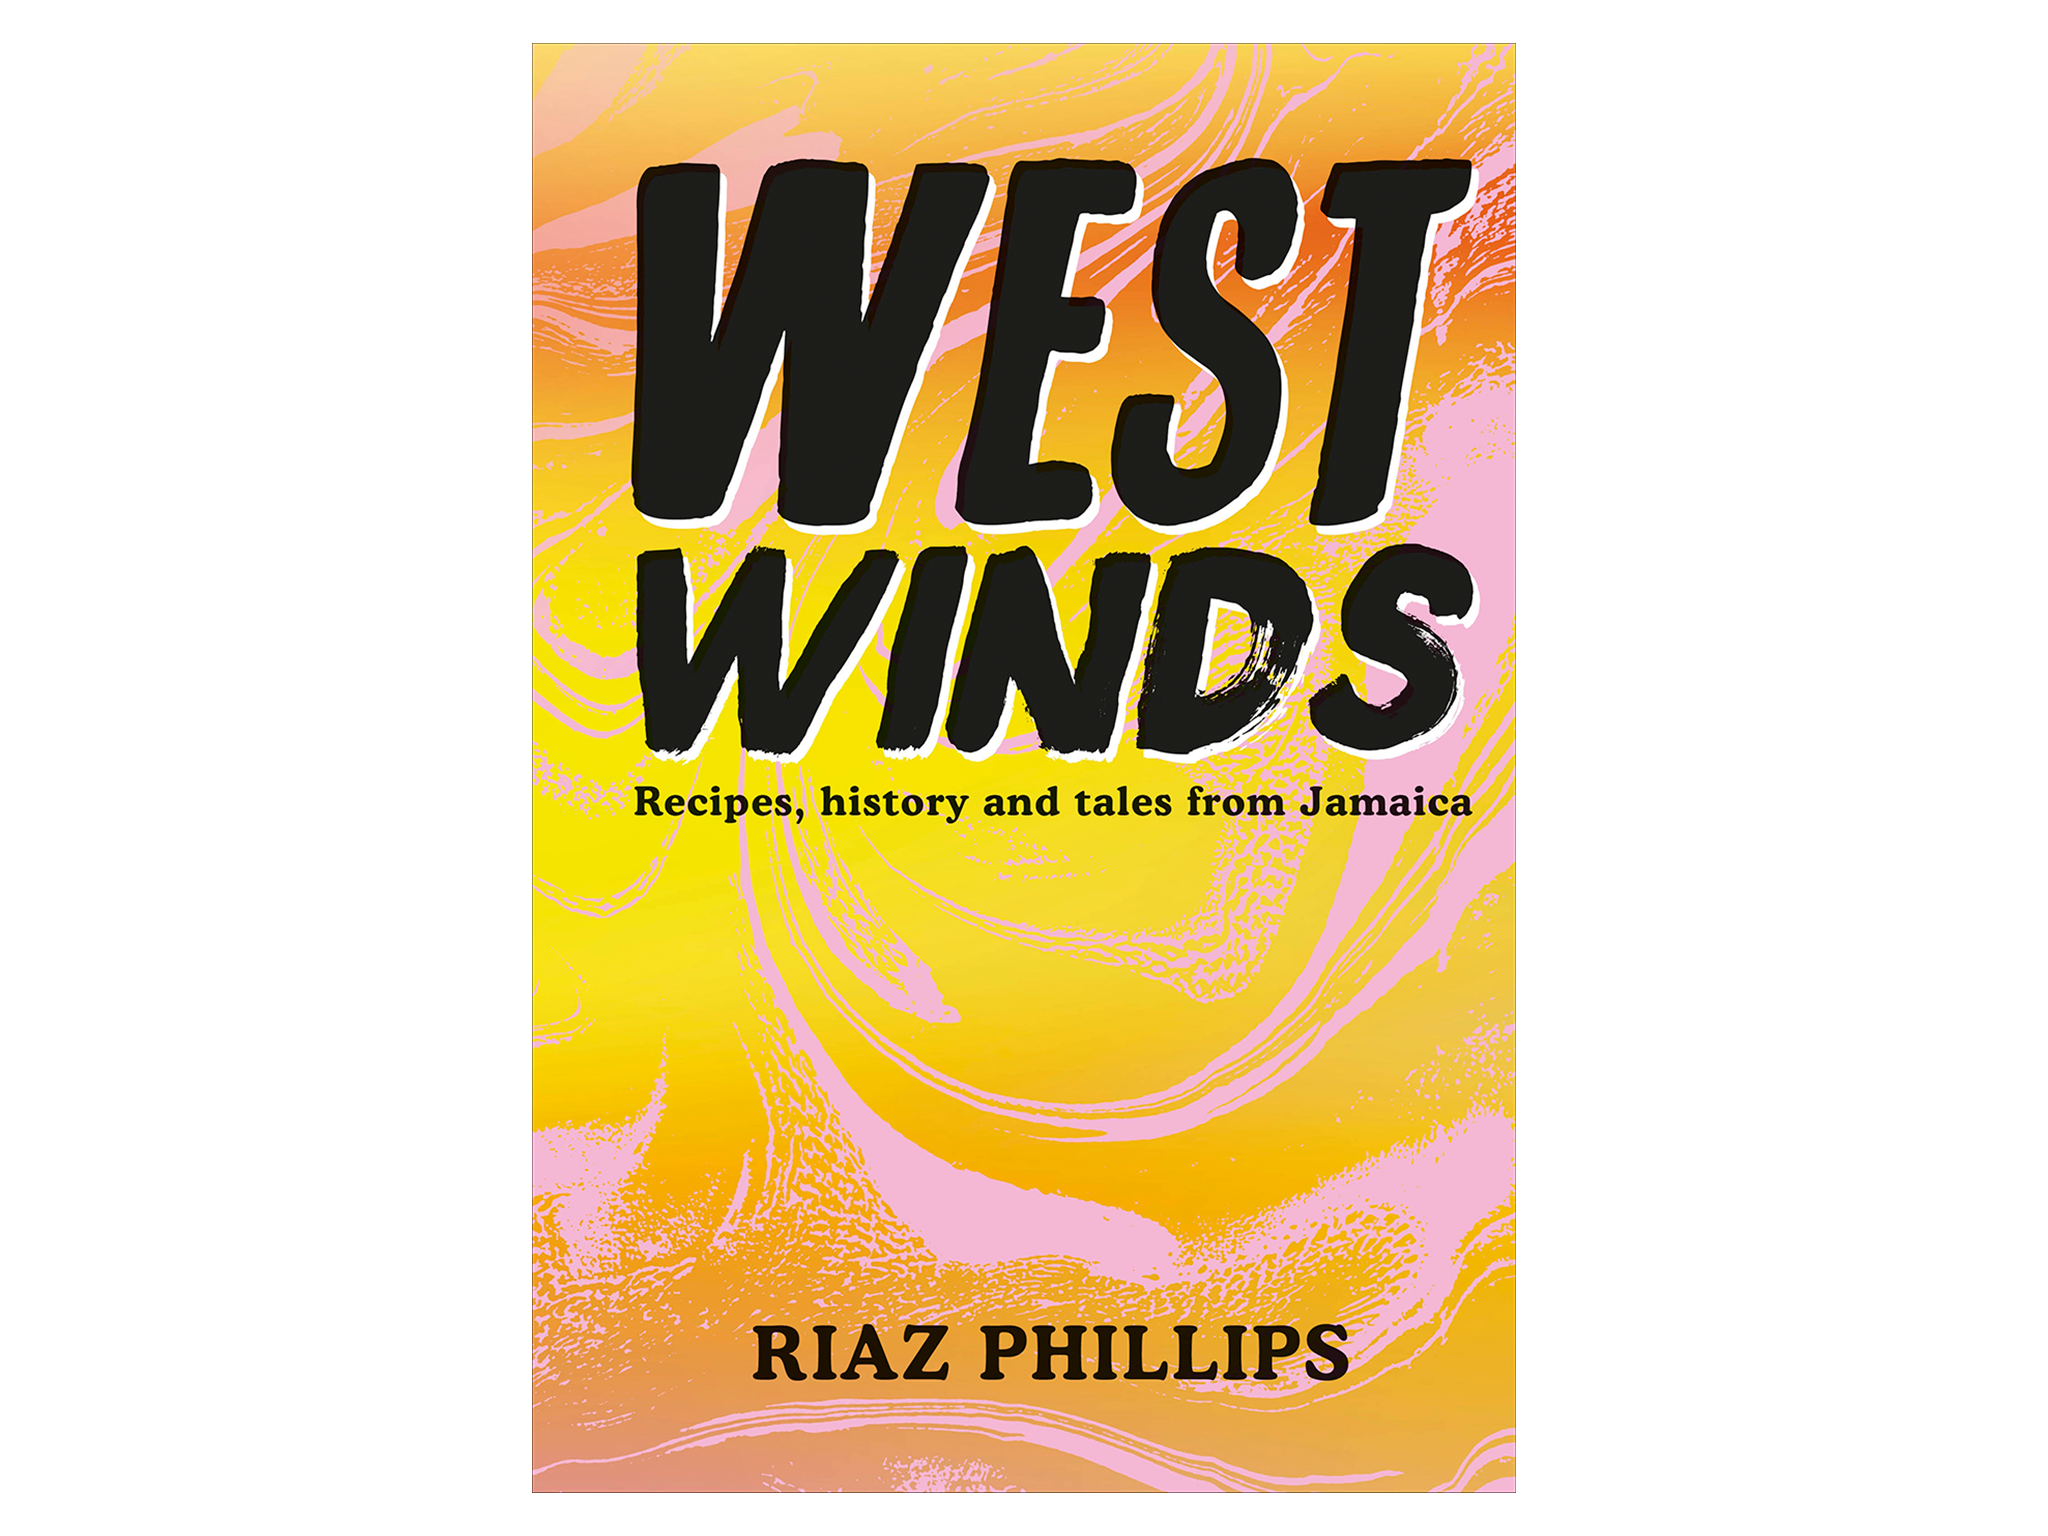 ‘West Winds Recipes, history and tales from Jamaica’ by Riaz Philips, published by DK